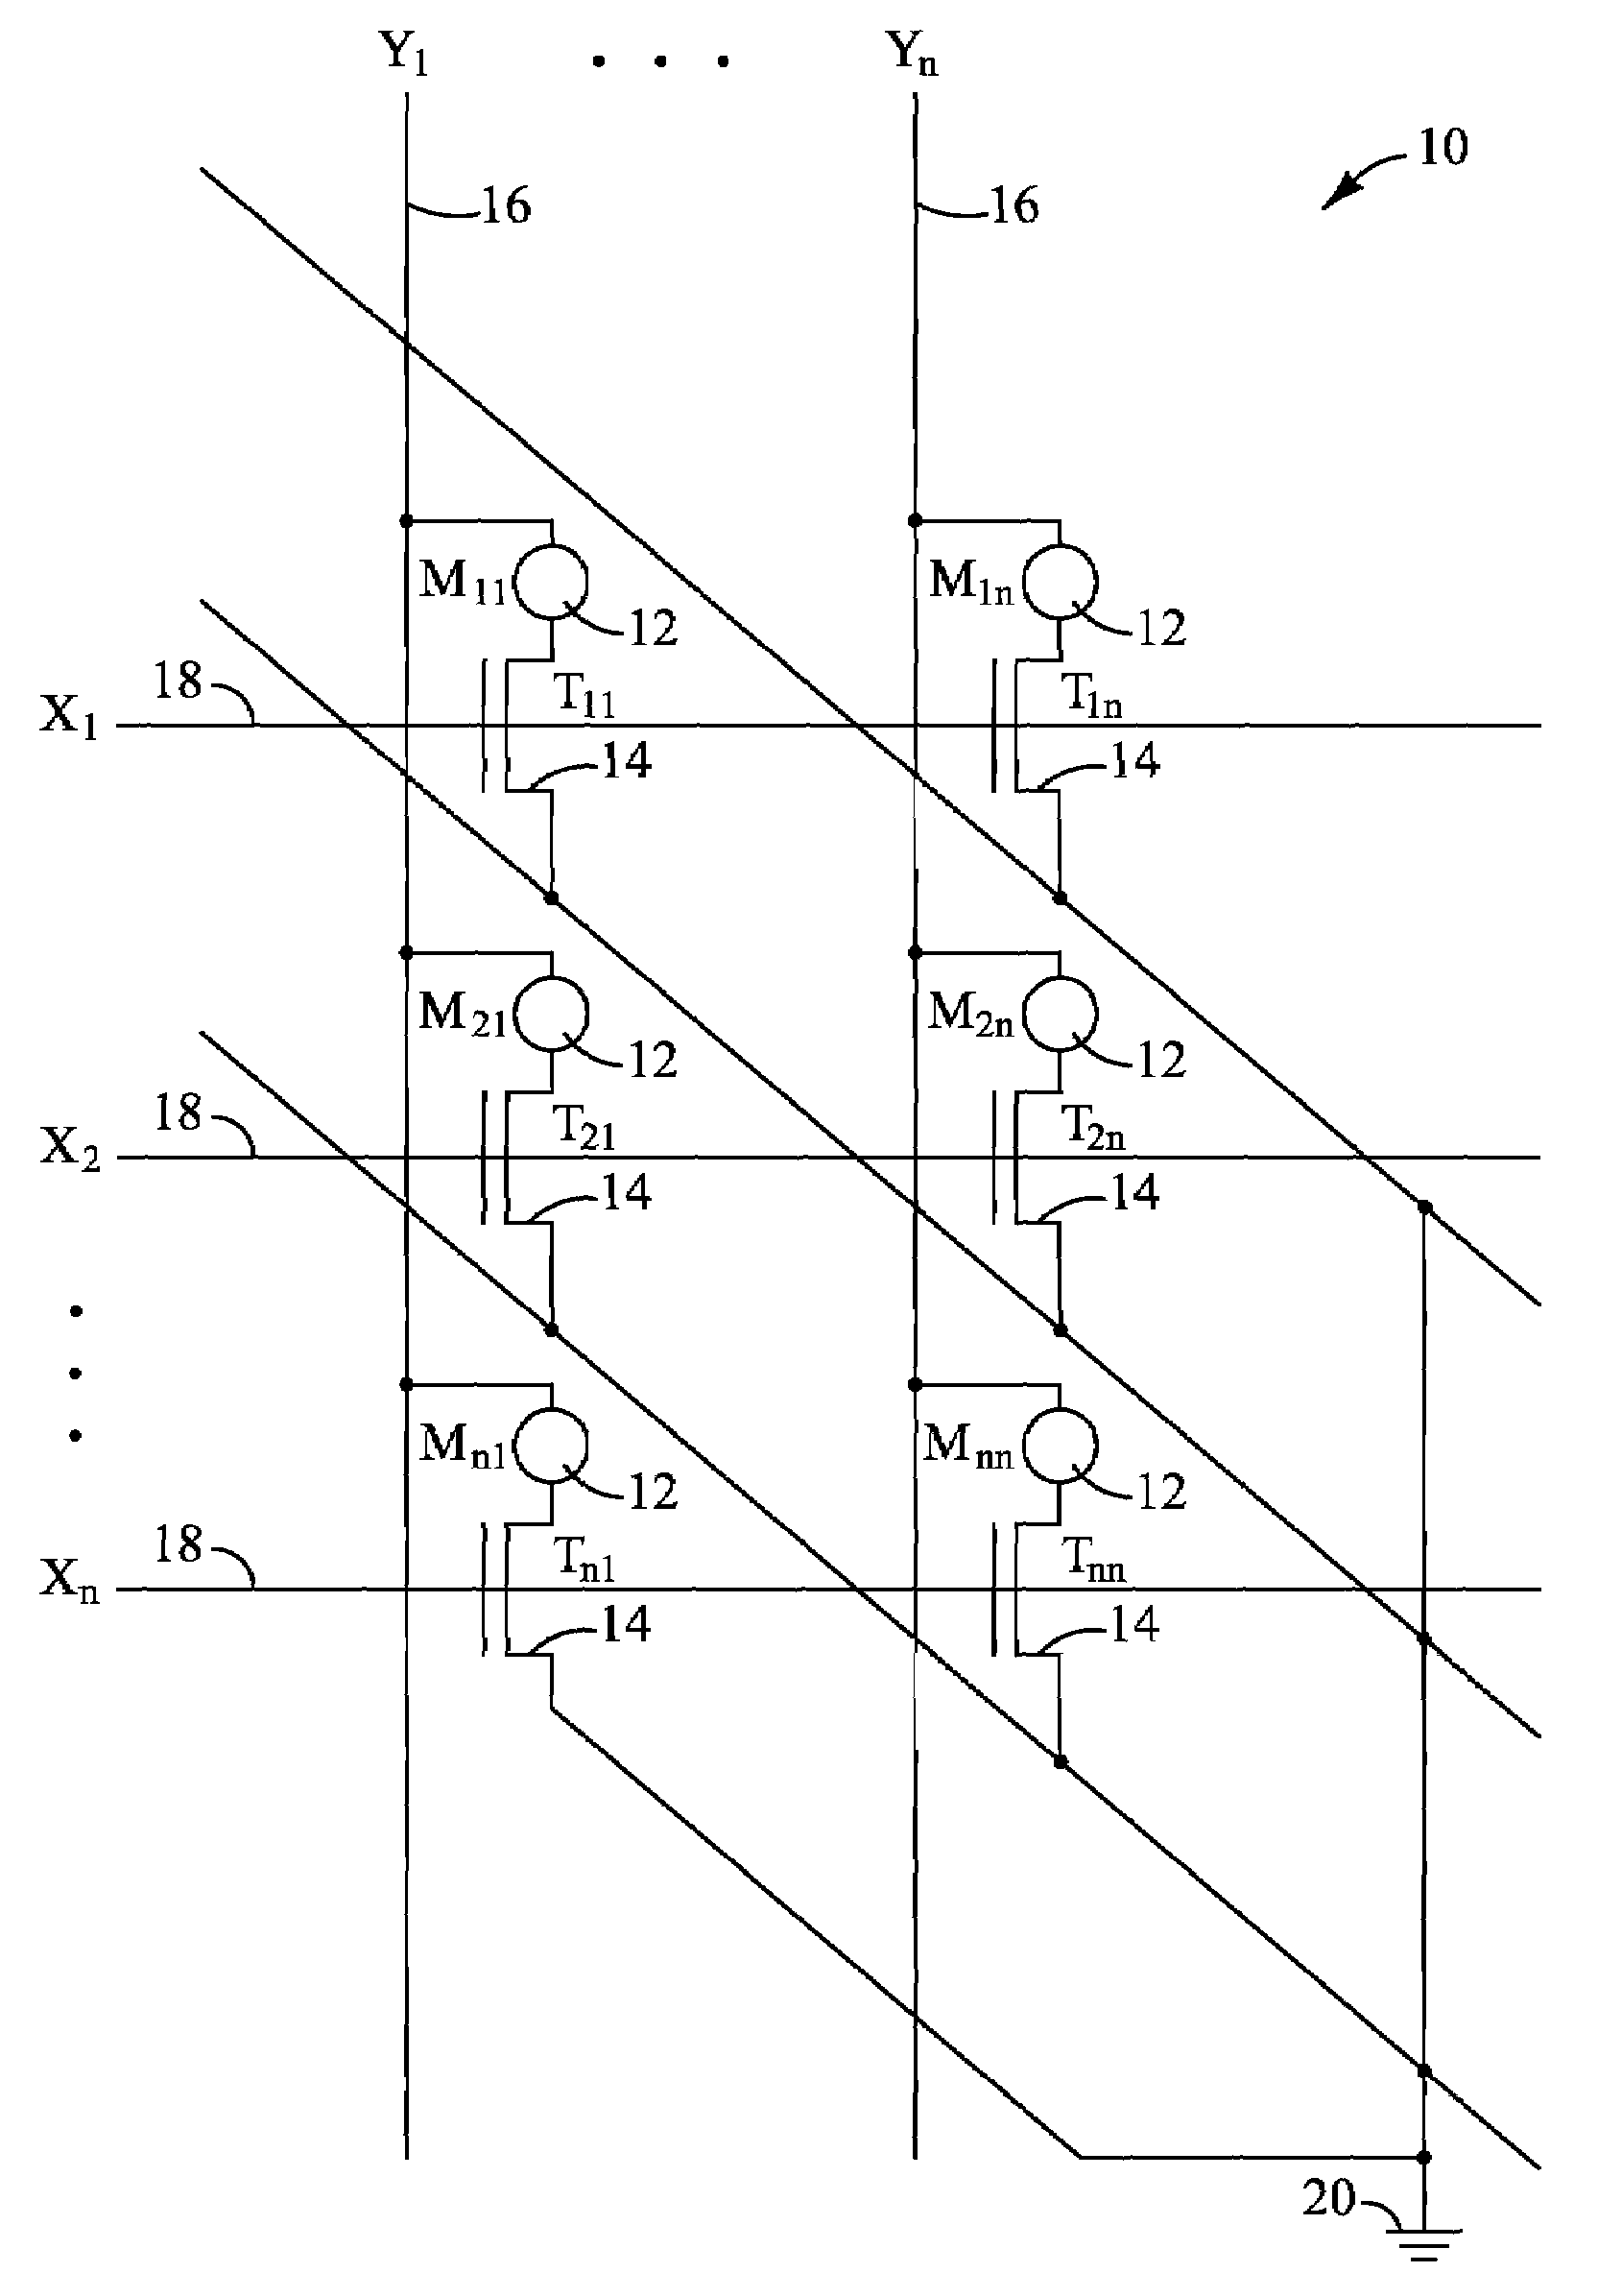 Sequential and video access for non-volatile memory arrays